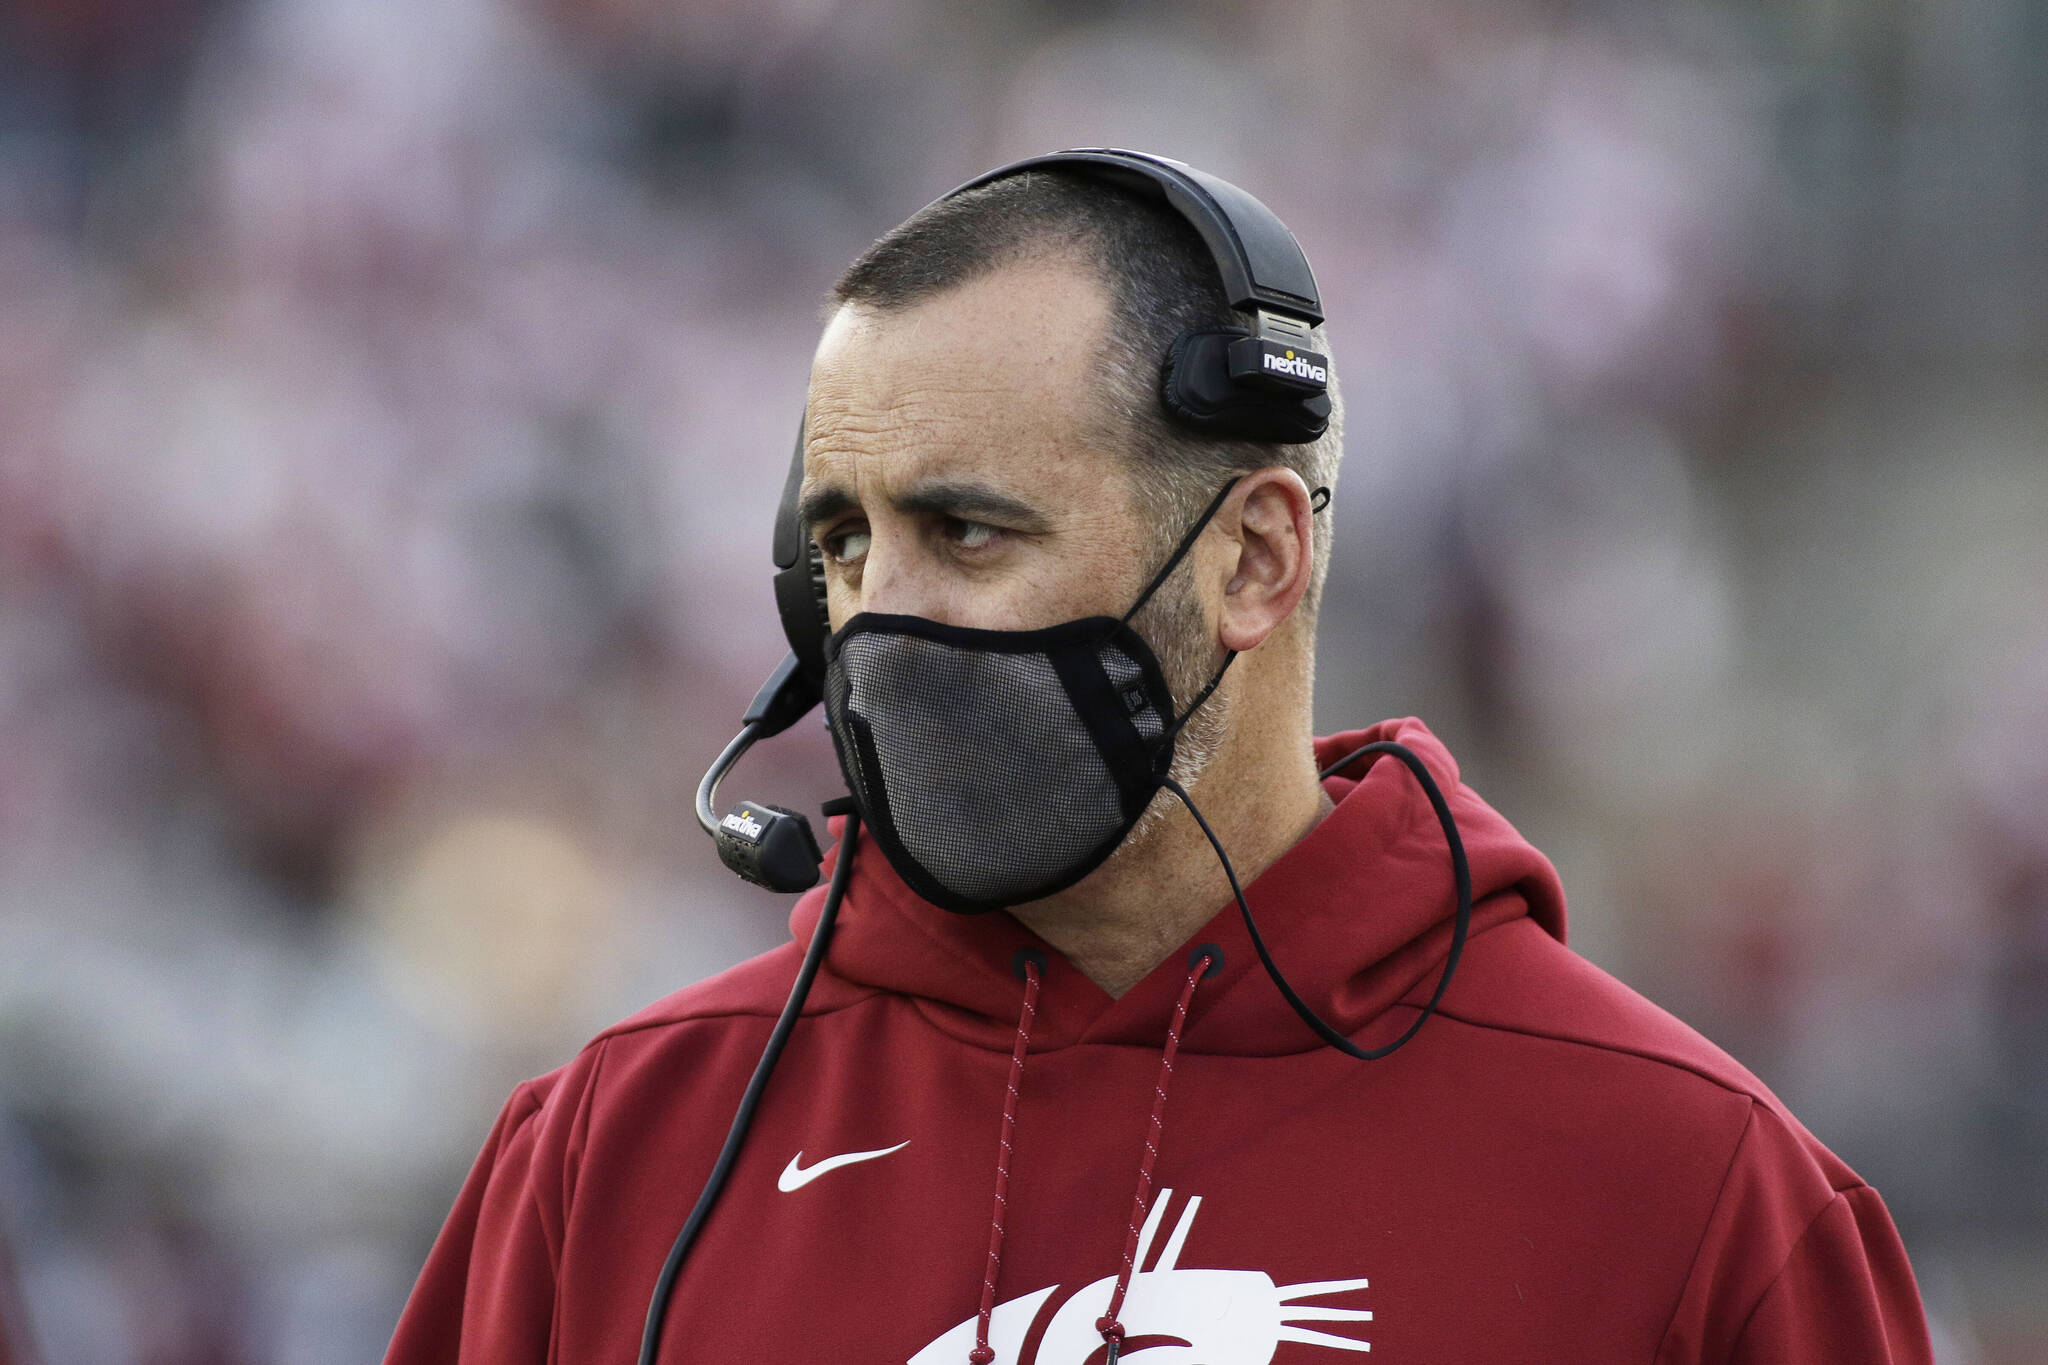 Washington State coach Nick Rolovich watches during the first half of the team's NCAA college football game against Stanford, Saturday, Oct. 16, 2021, in Pullman, Wash. (AP Photo/Young Kwak)